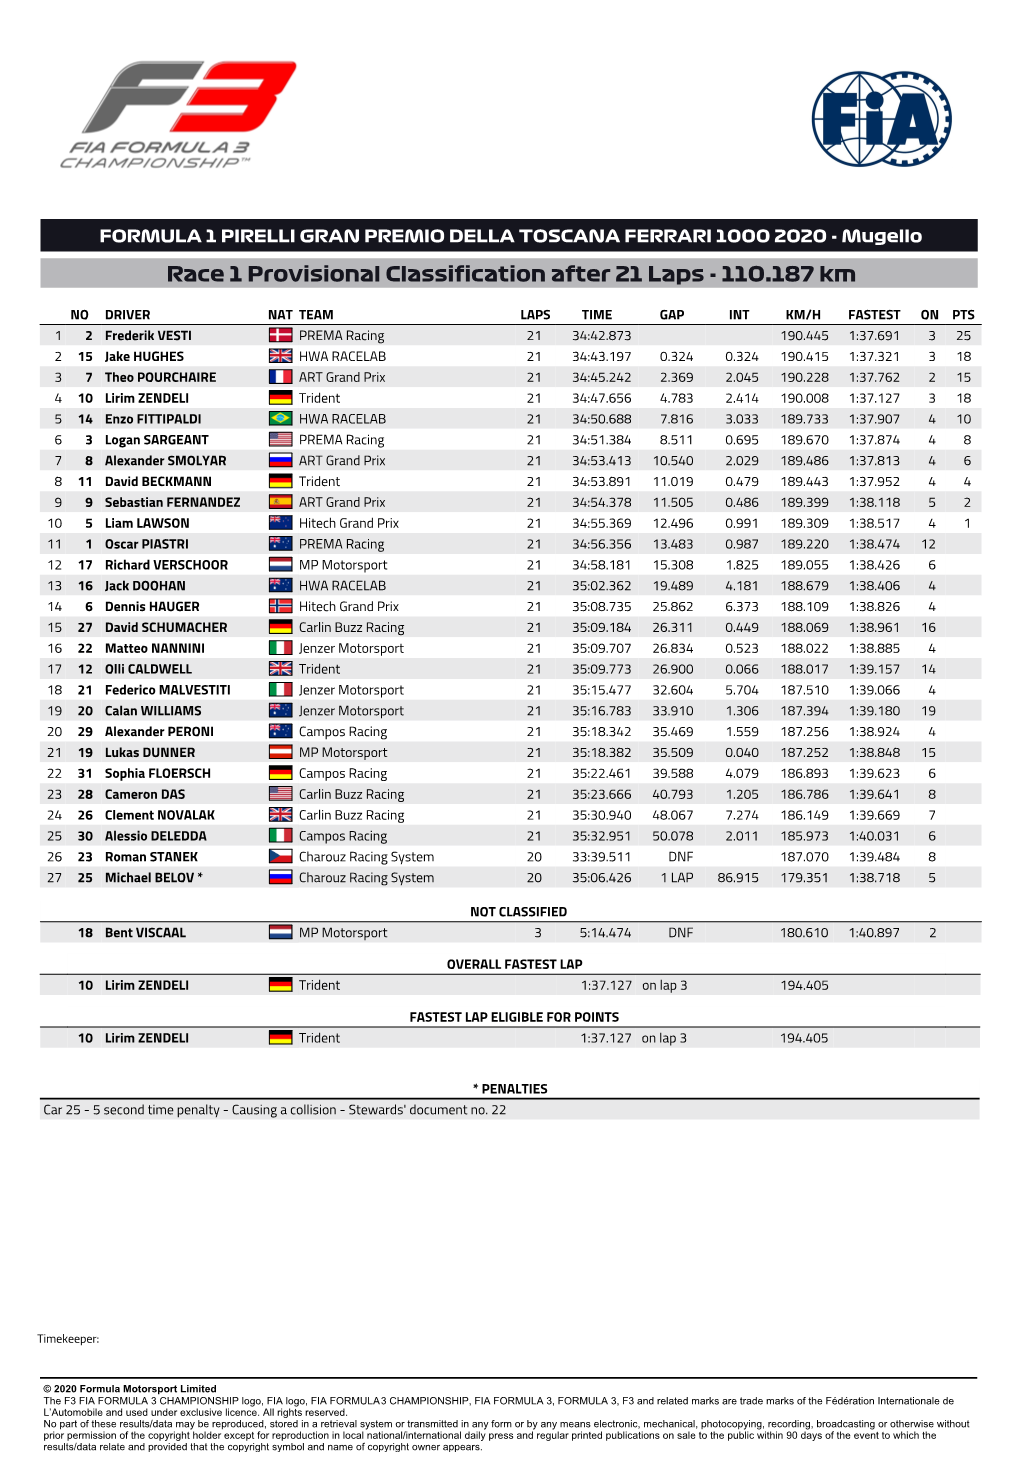 Race 1 Provisional Classification After 21 Laps - 110.187 Km